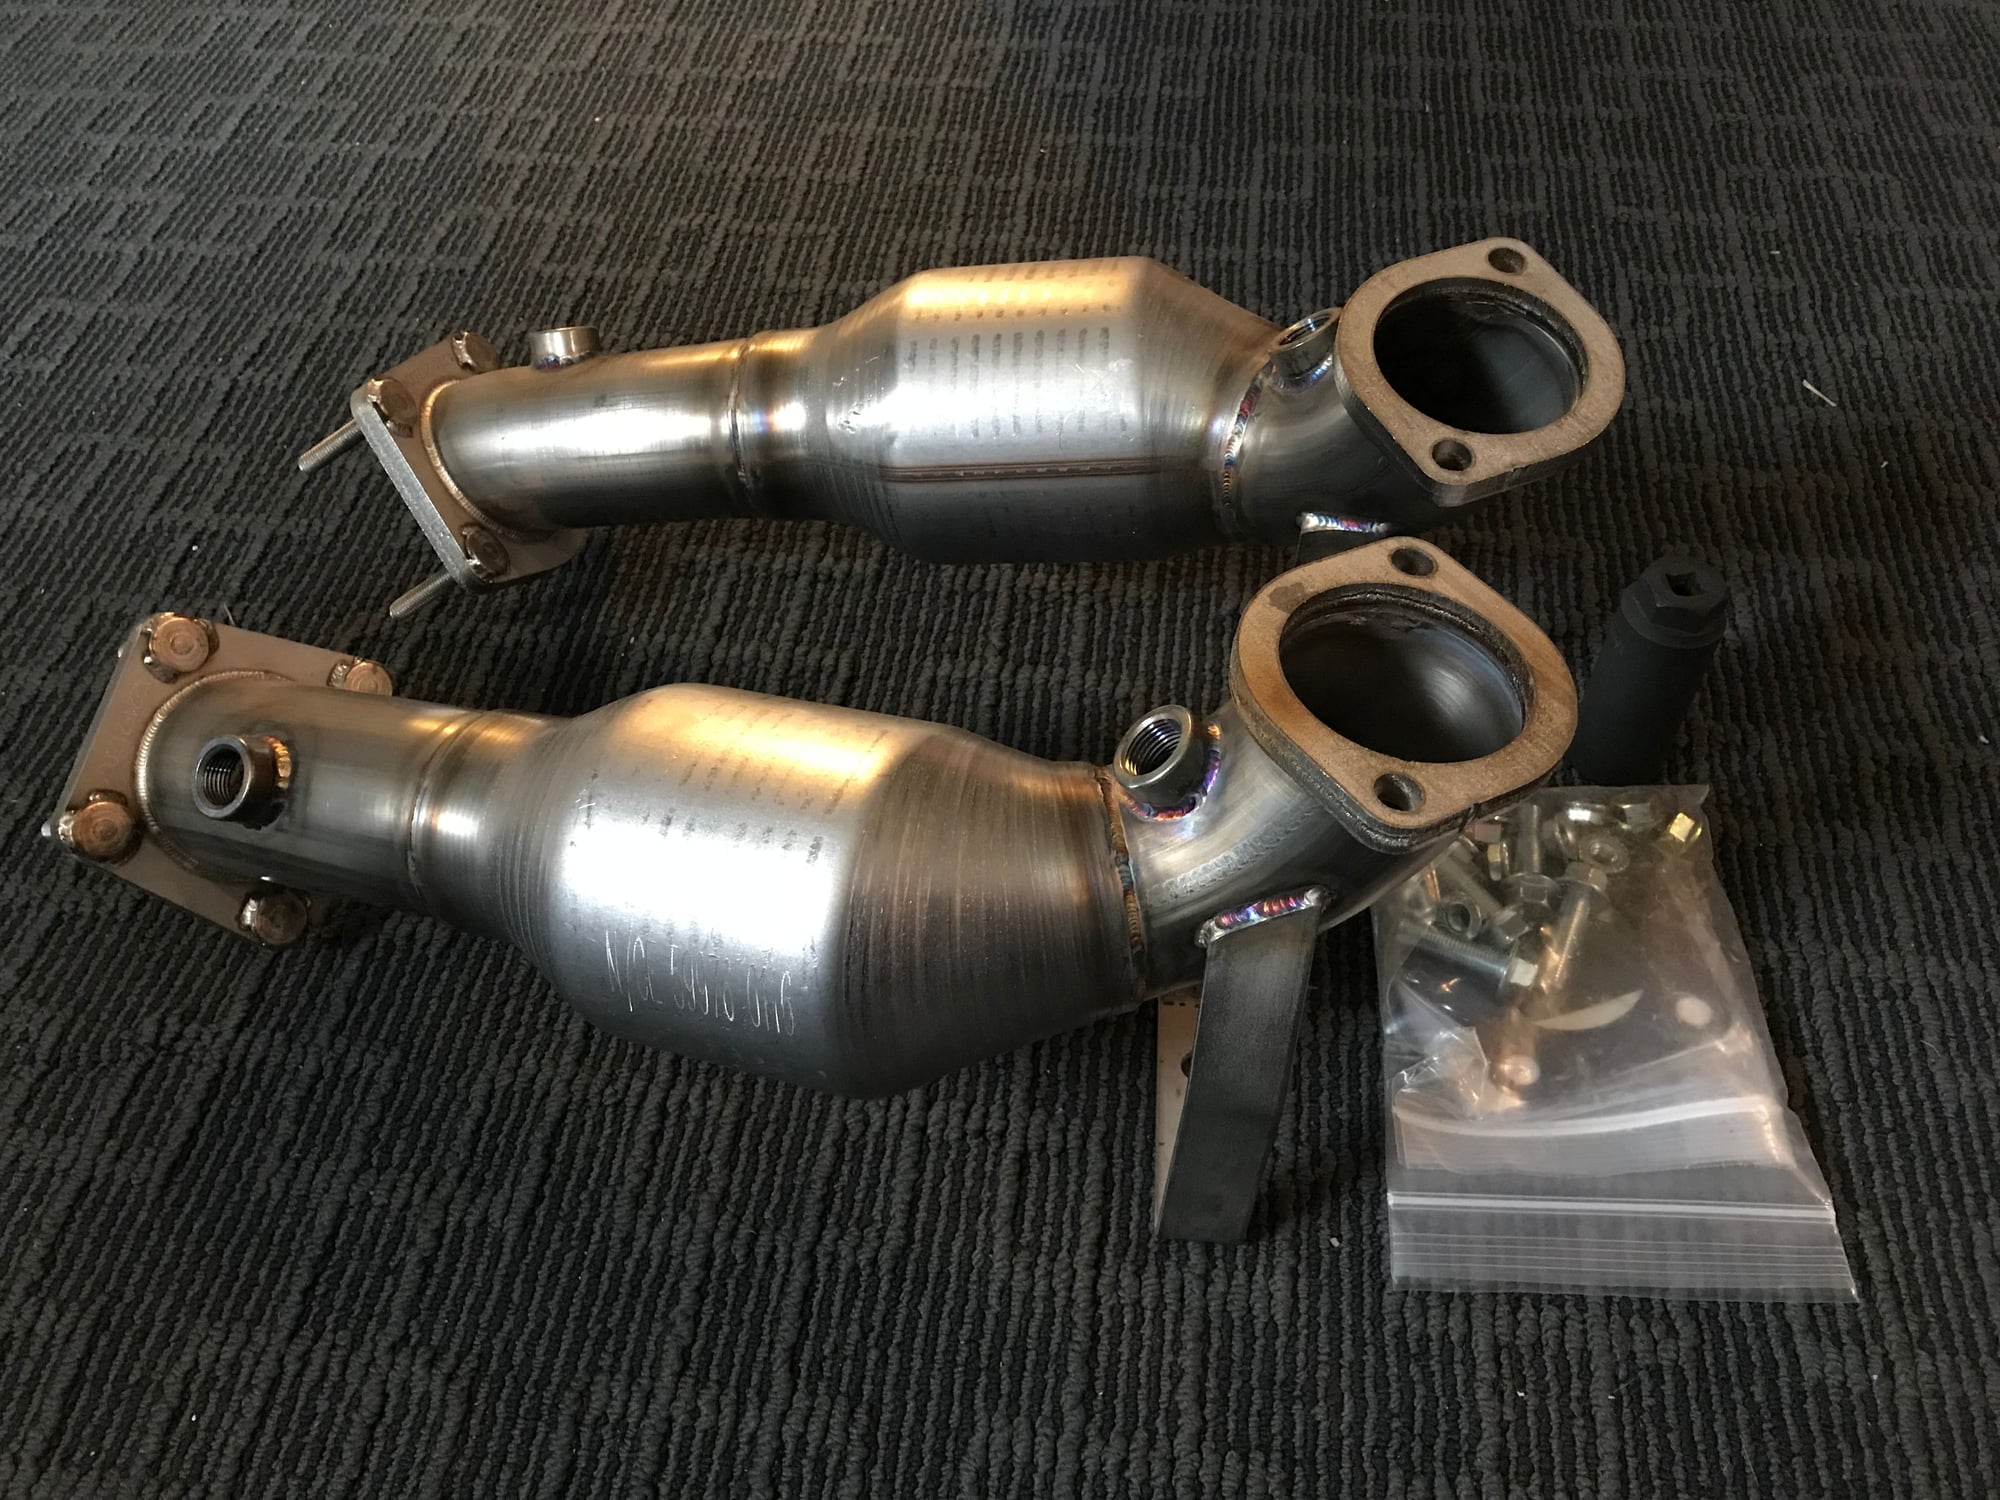 Engine - Exhaust - Nameless Downpipes Manufactured for 2003-2006 XKR - New - 2003 to 2006 Jaguar XKR - Santa Ana, CA 92706, United States